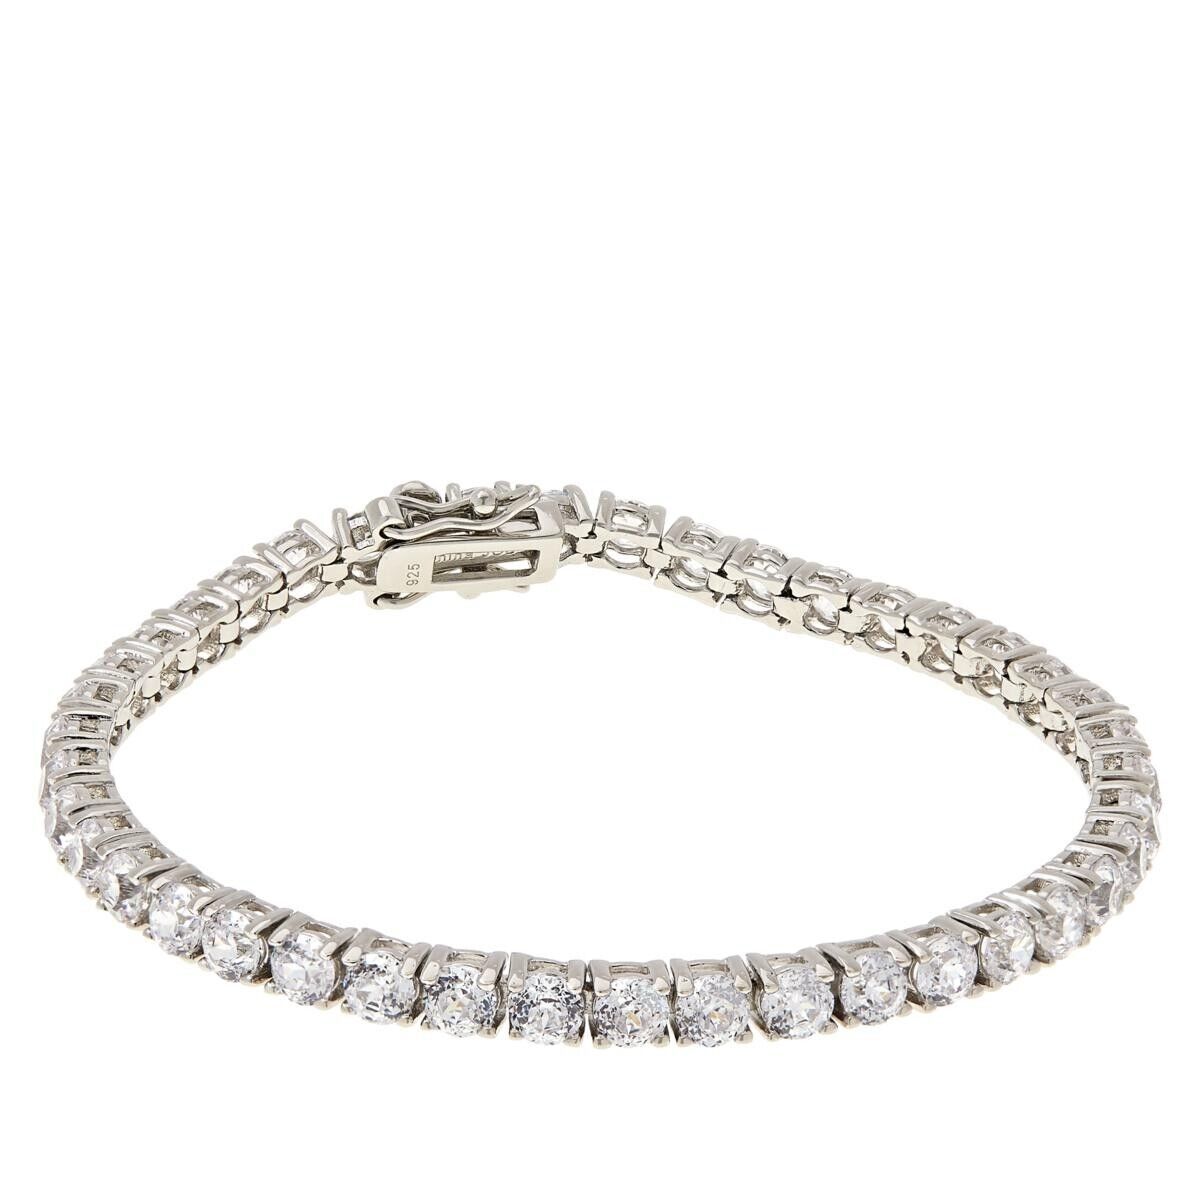 Absolute Sterling Silver 100-Facet Round 4mm Tennis Bracelet. 8"